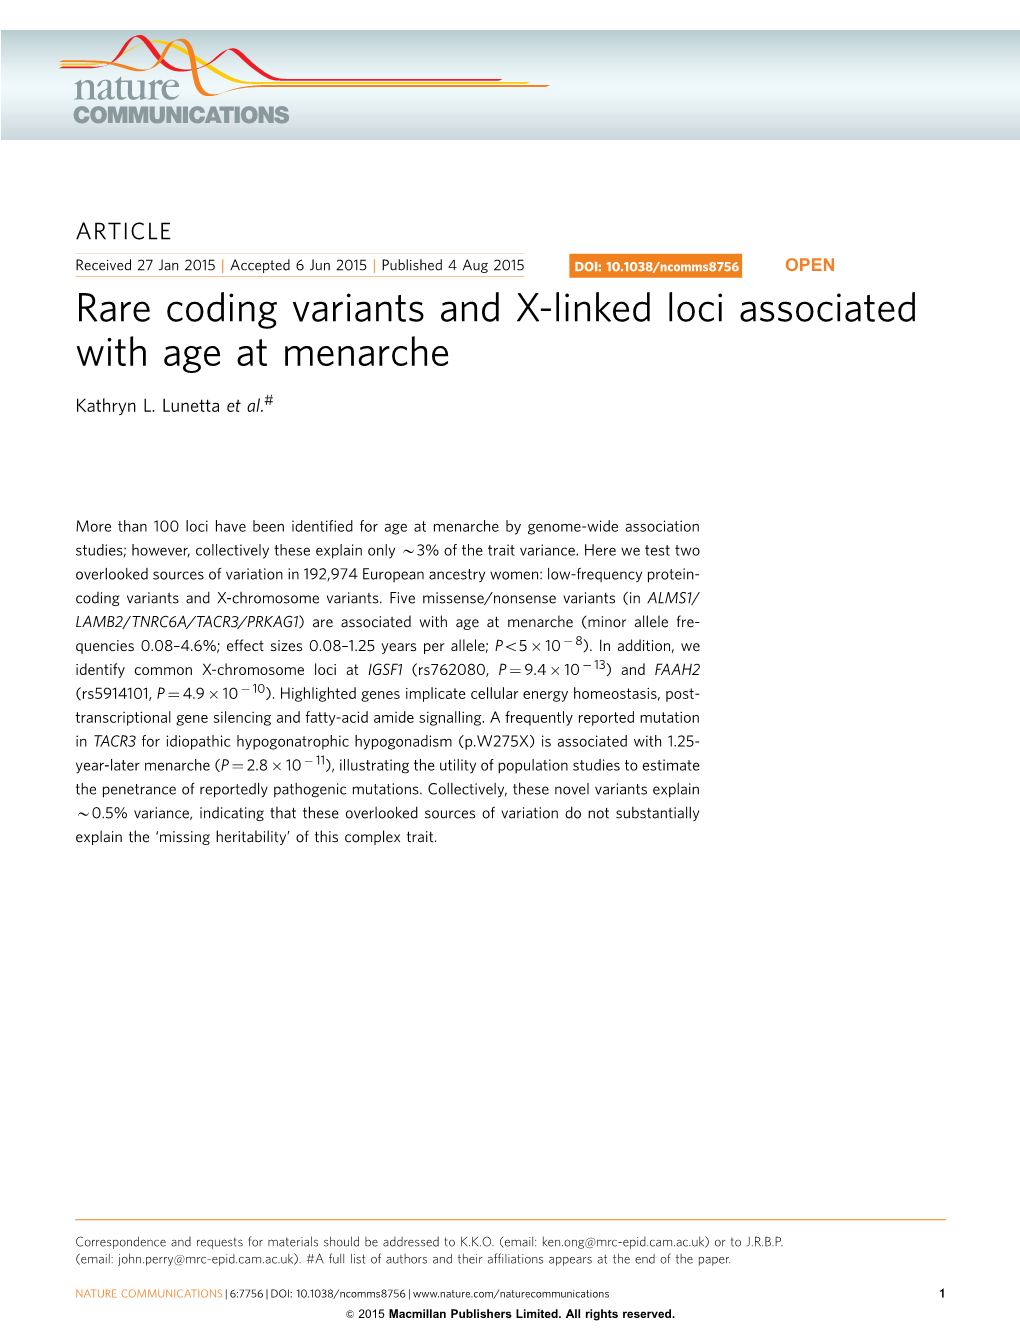 Rare Coding Variants and X-Linked Loci Associated with Age at Menarche